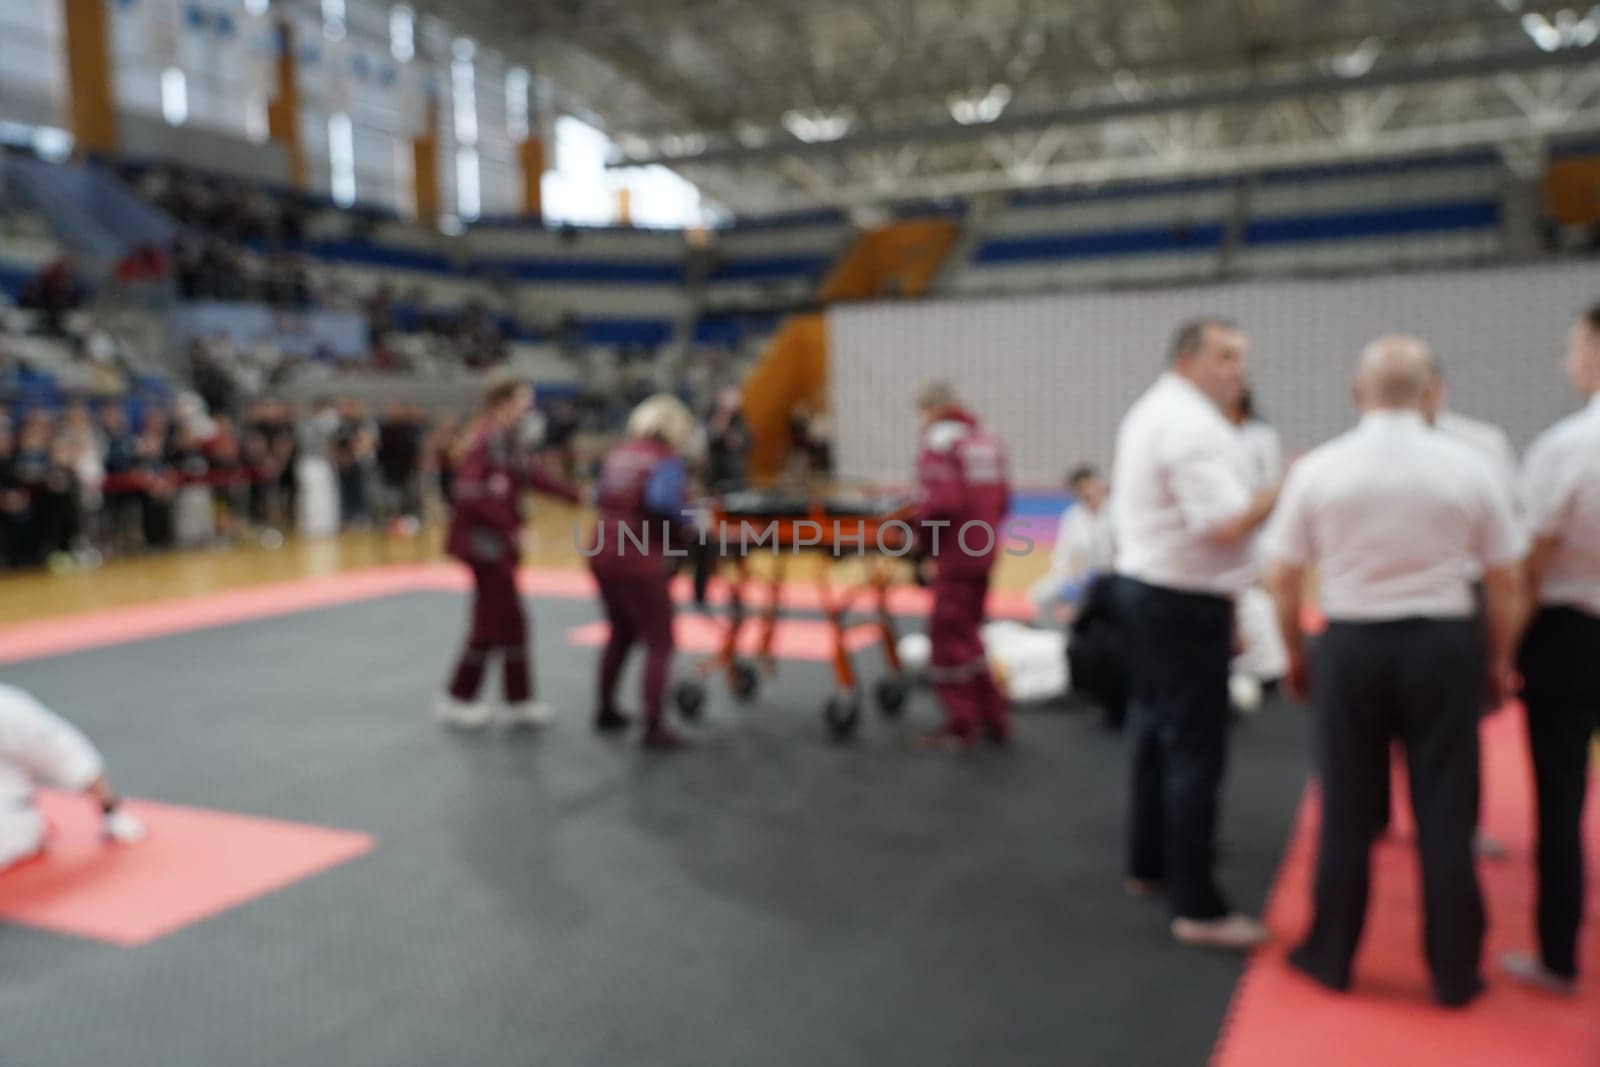 A team of doctors provides assistance to an athlete who was injured in a karate competition. Blurred background image.